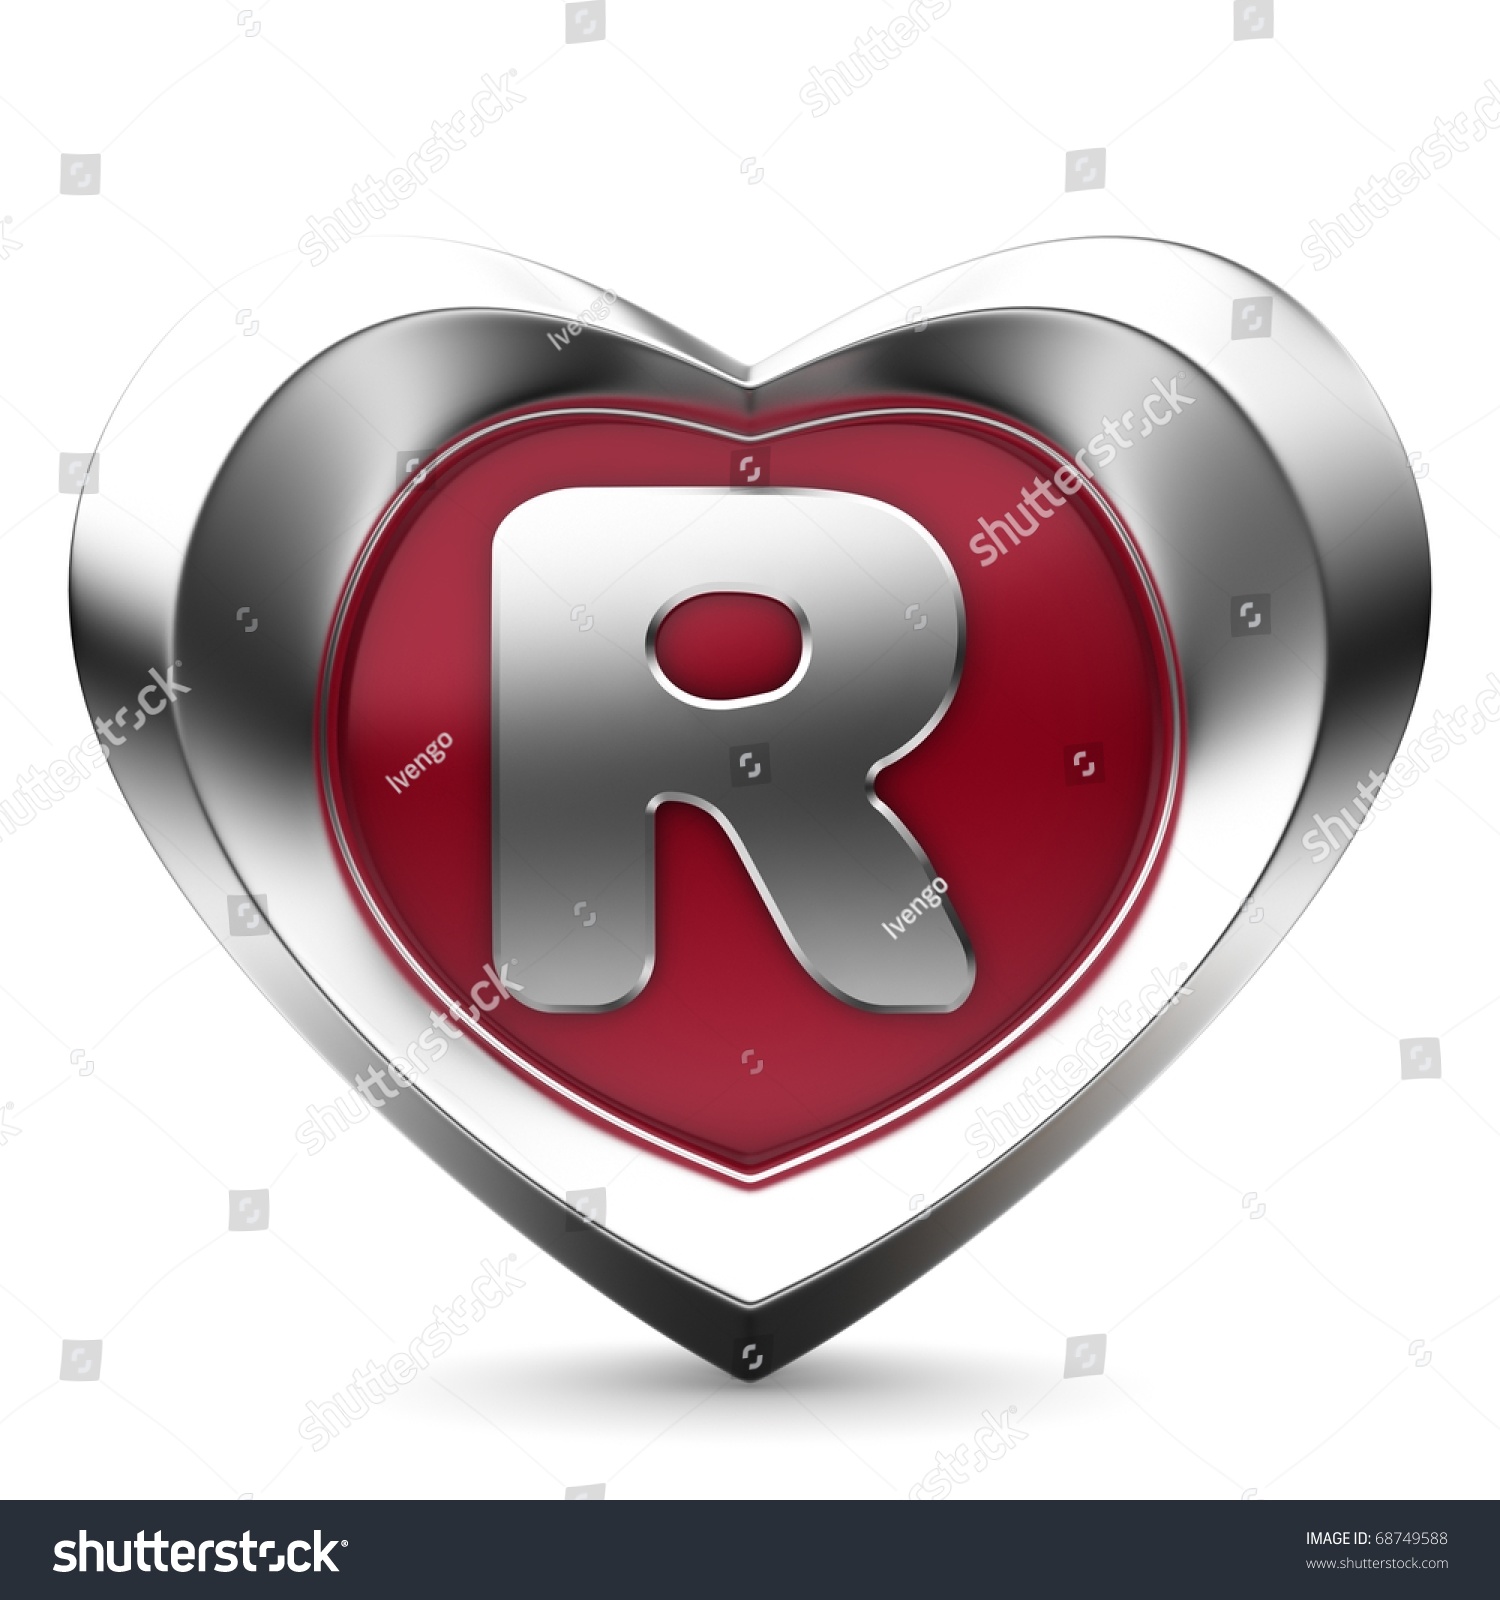 Letter R From Alphabet Of Hearts Stock Photo 68749588 ...